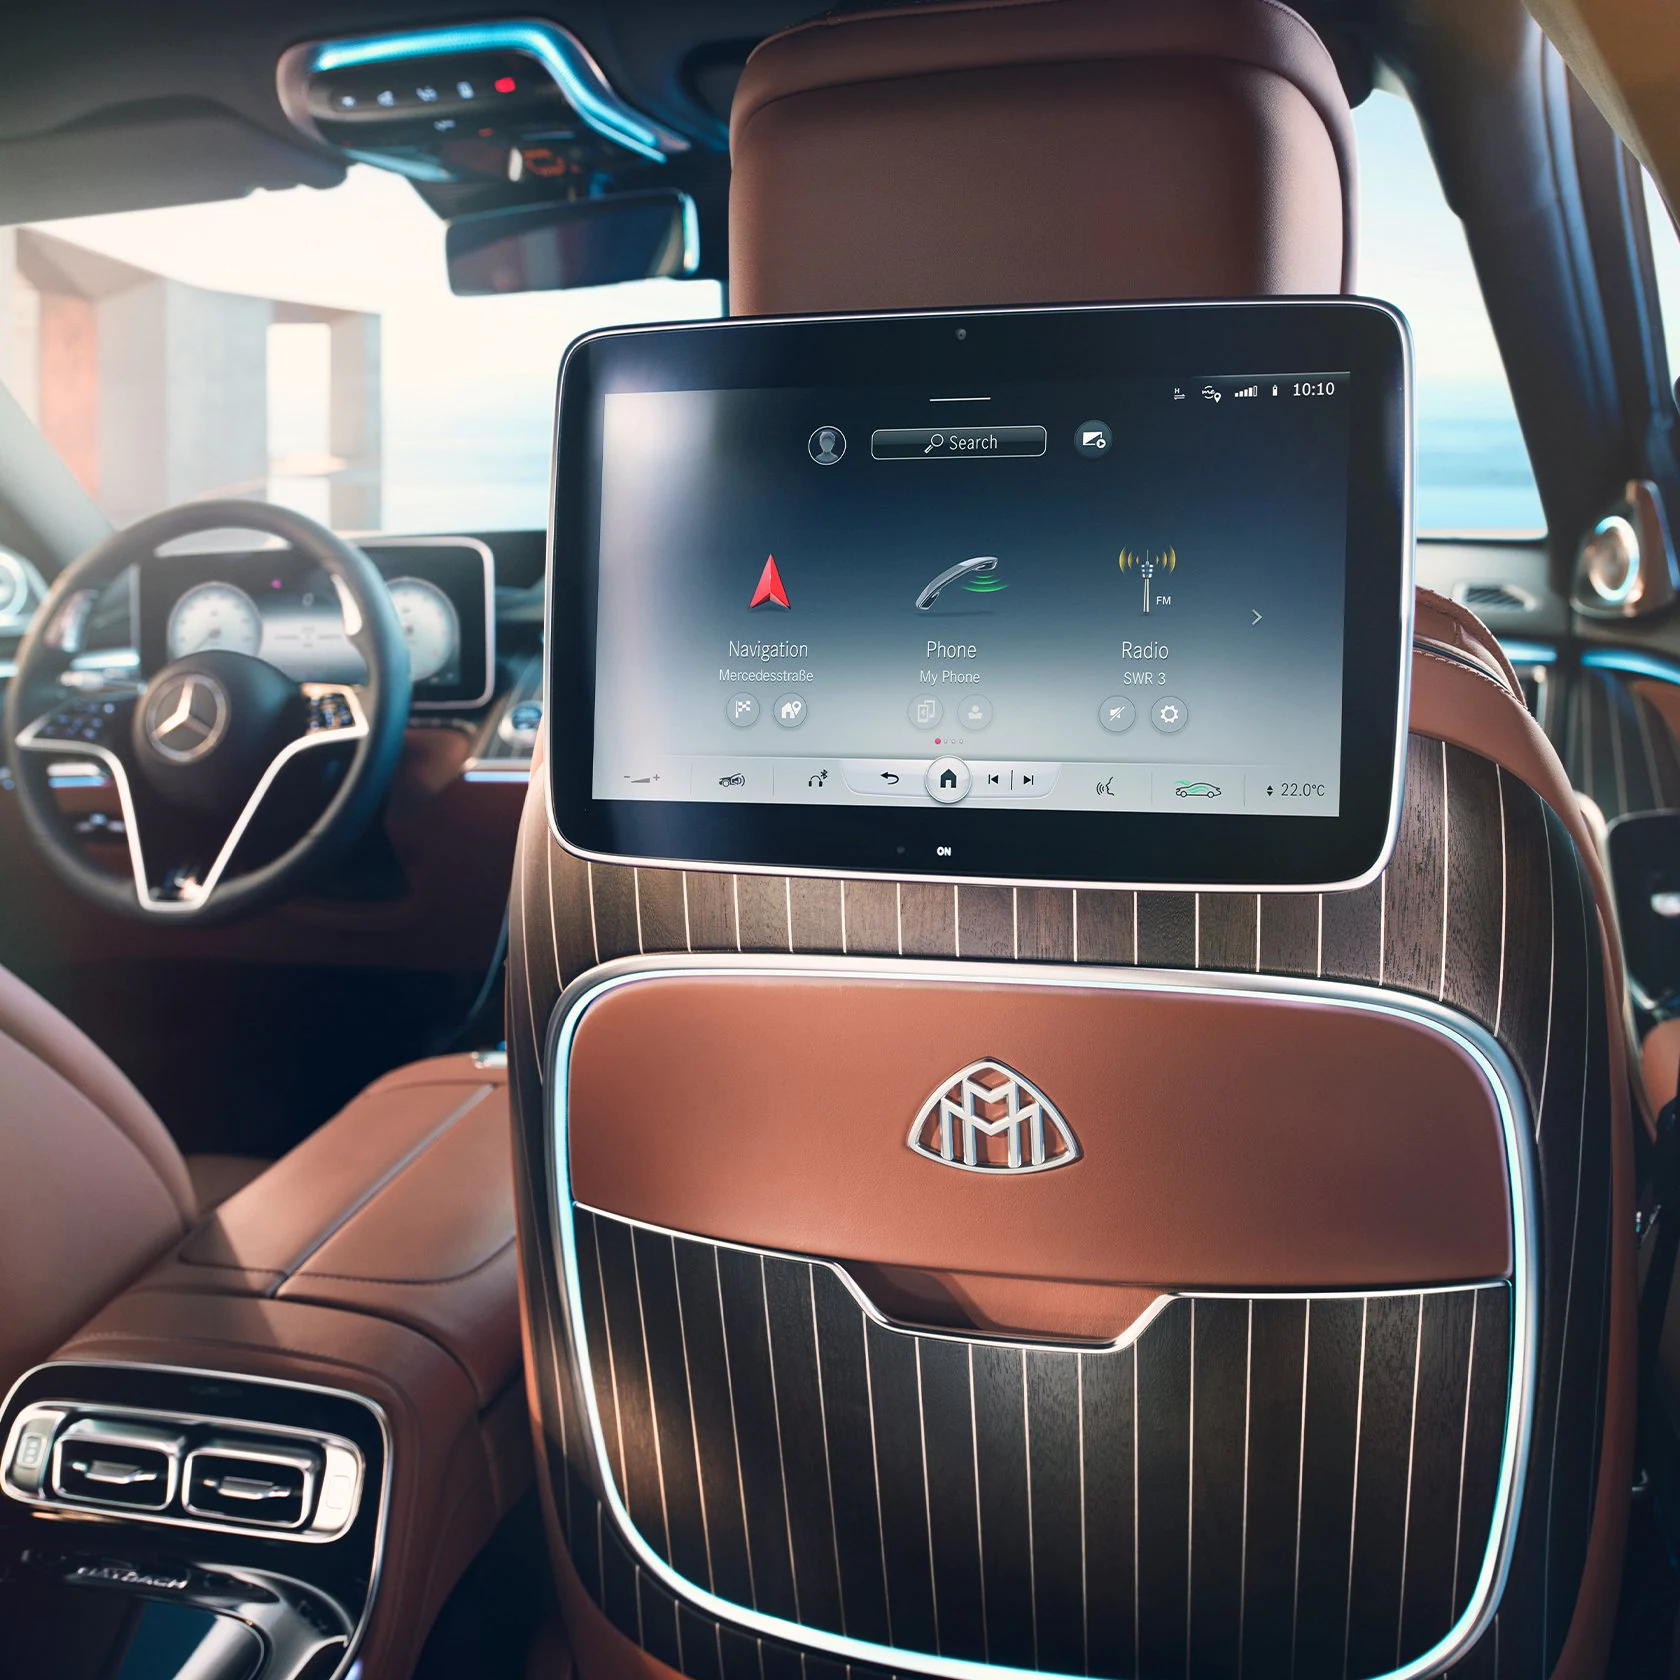 Mercedes-Maybach S680 2022